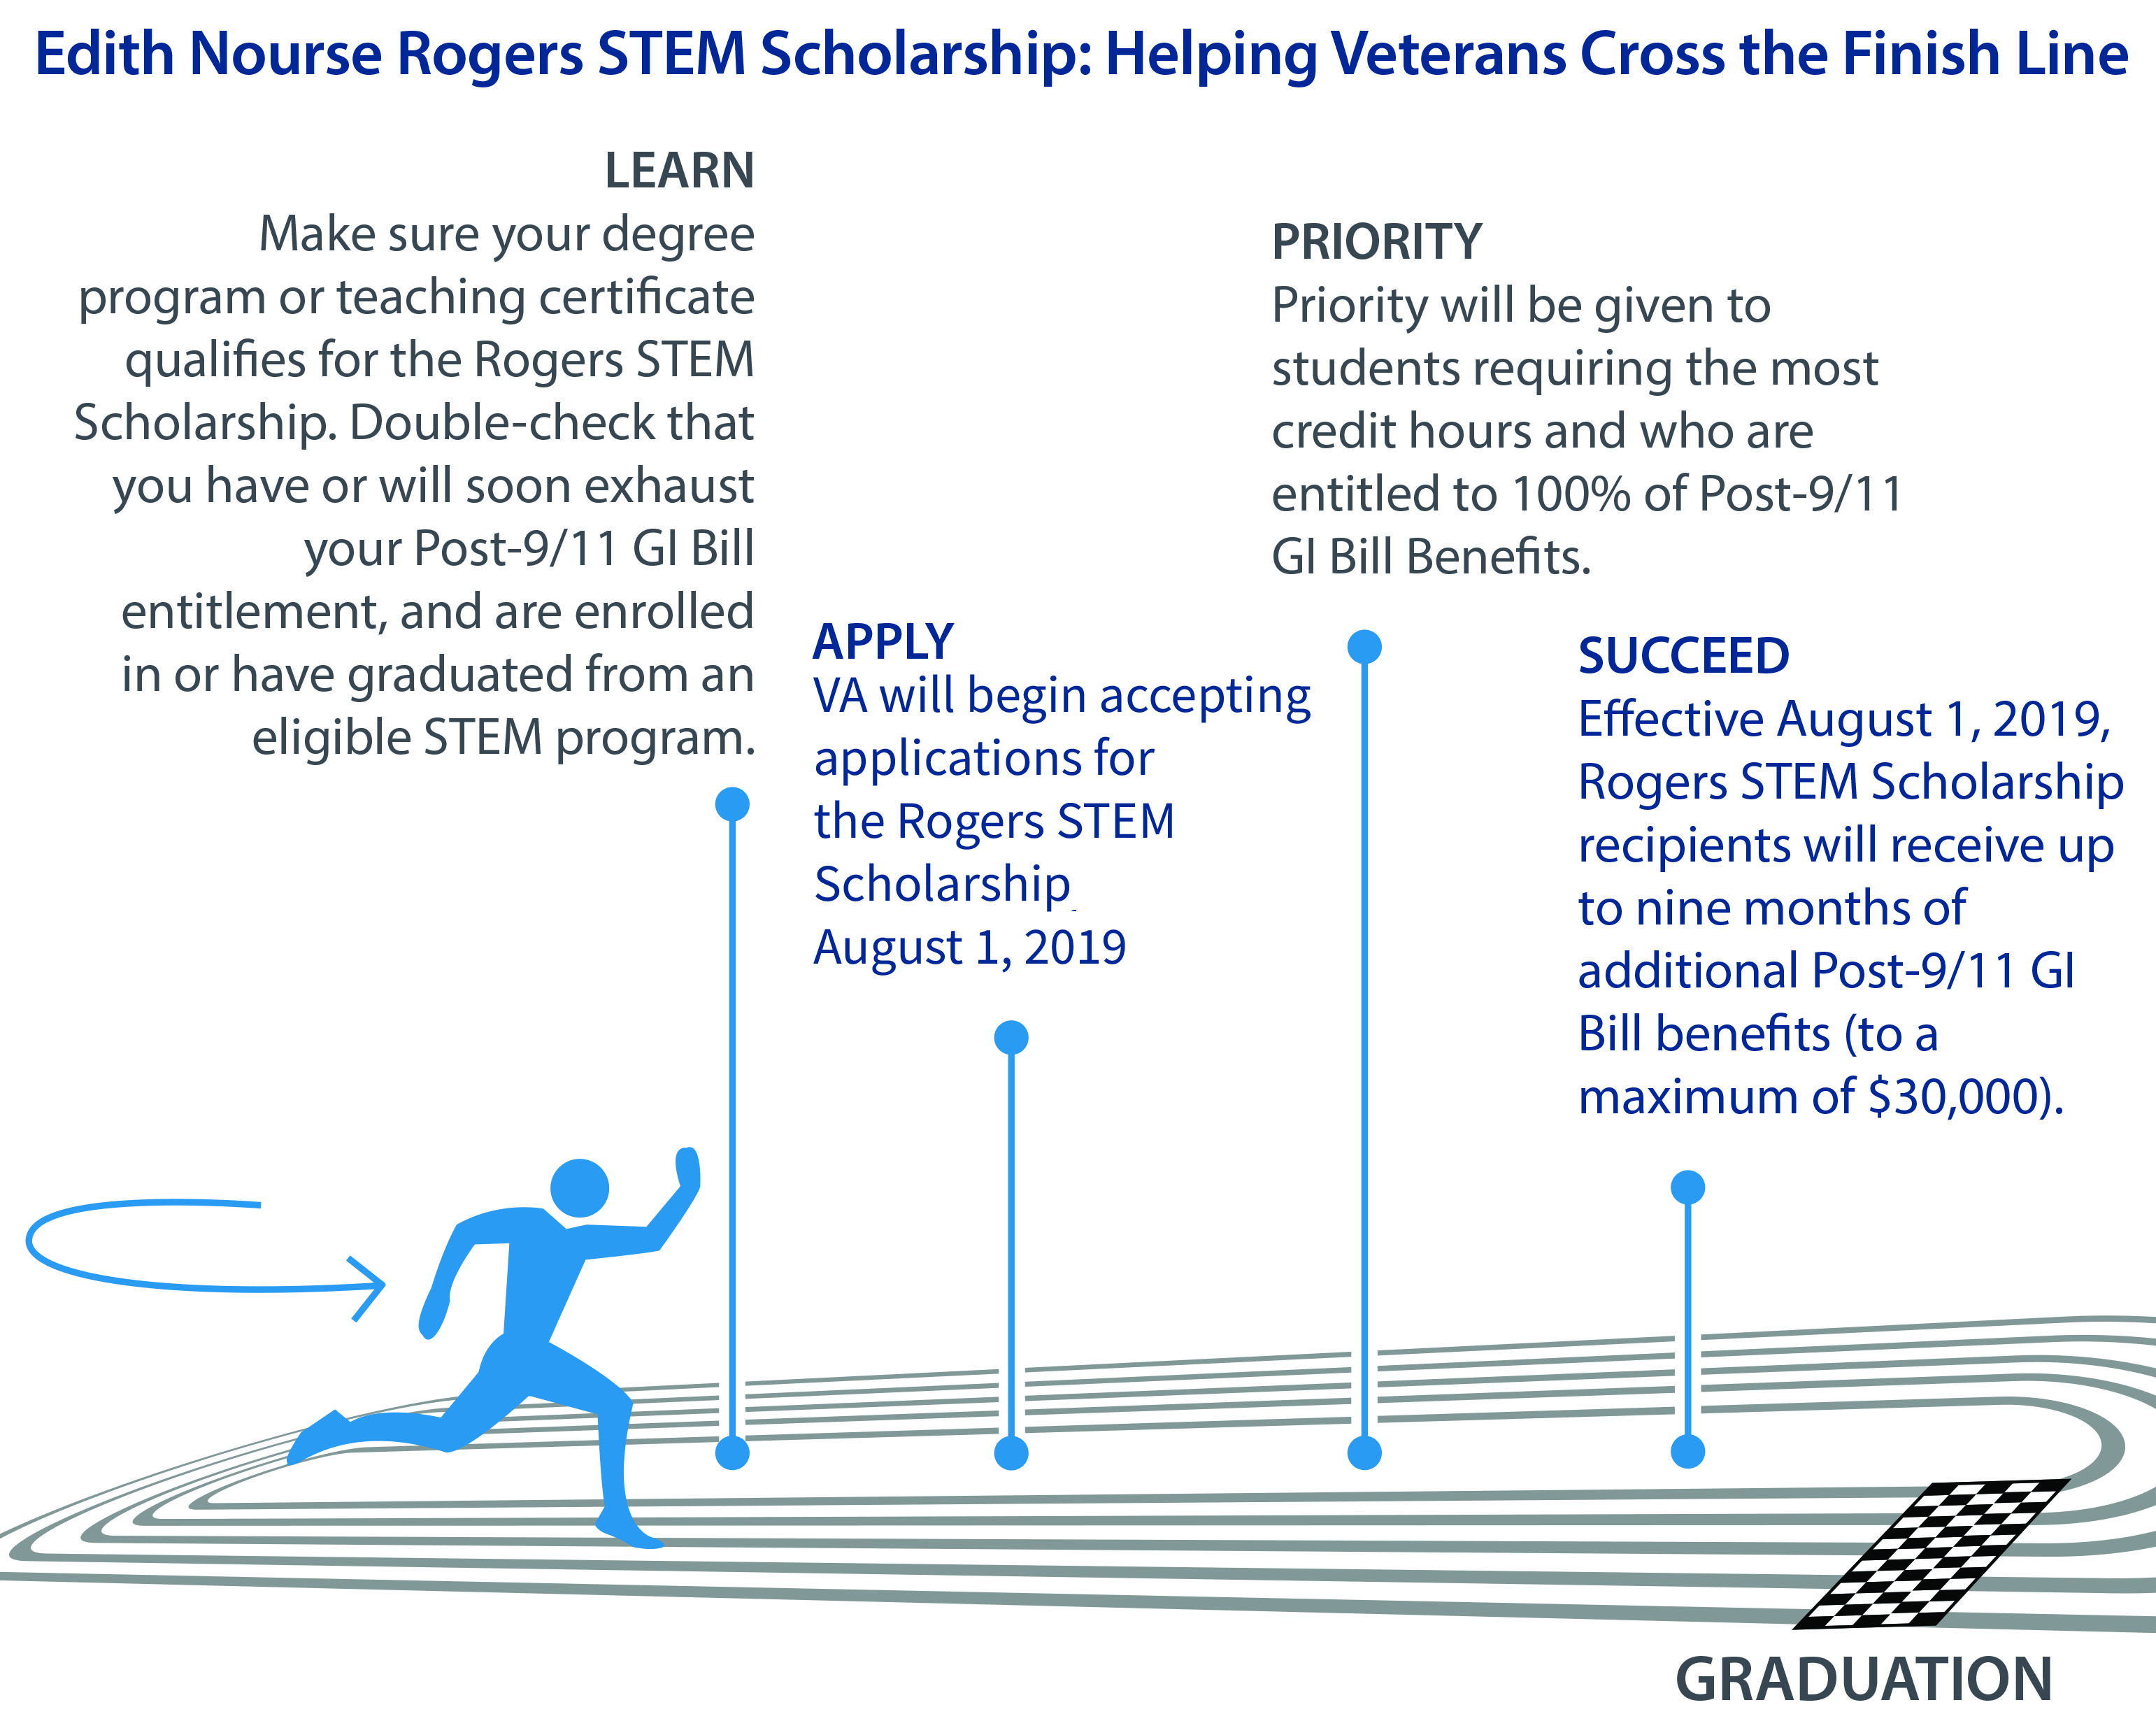 Infographic - Edith Nourse Rogers STEM Scholarship:  Helping Veterans Cross the Finish Line.  Learn - Make sure your degree program or teaching certificate qualifies for the Rogers STEM Scholarship.  Double-check that you have or will soon exhaust your Post-9/11 GI Bill entitlement, and are enrolled in or have graduated from an eligible STEM program.  Apply - VA will begin accepting applications for the Rogers STEM Scholarship August 1, 2019.  Priority - Priority will be given to students requiring the most credit hours and who are entitled to 100% of Post-9/11 GI Bill Benefits.   Succeed - Effective August 1, 2019, Rogers STEM Scholarship receipients will receive up to nine months of additional Post-9/11 GI Bill benefits (to a maximum of $30,000).